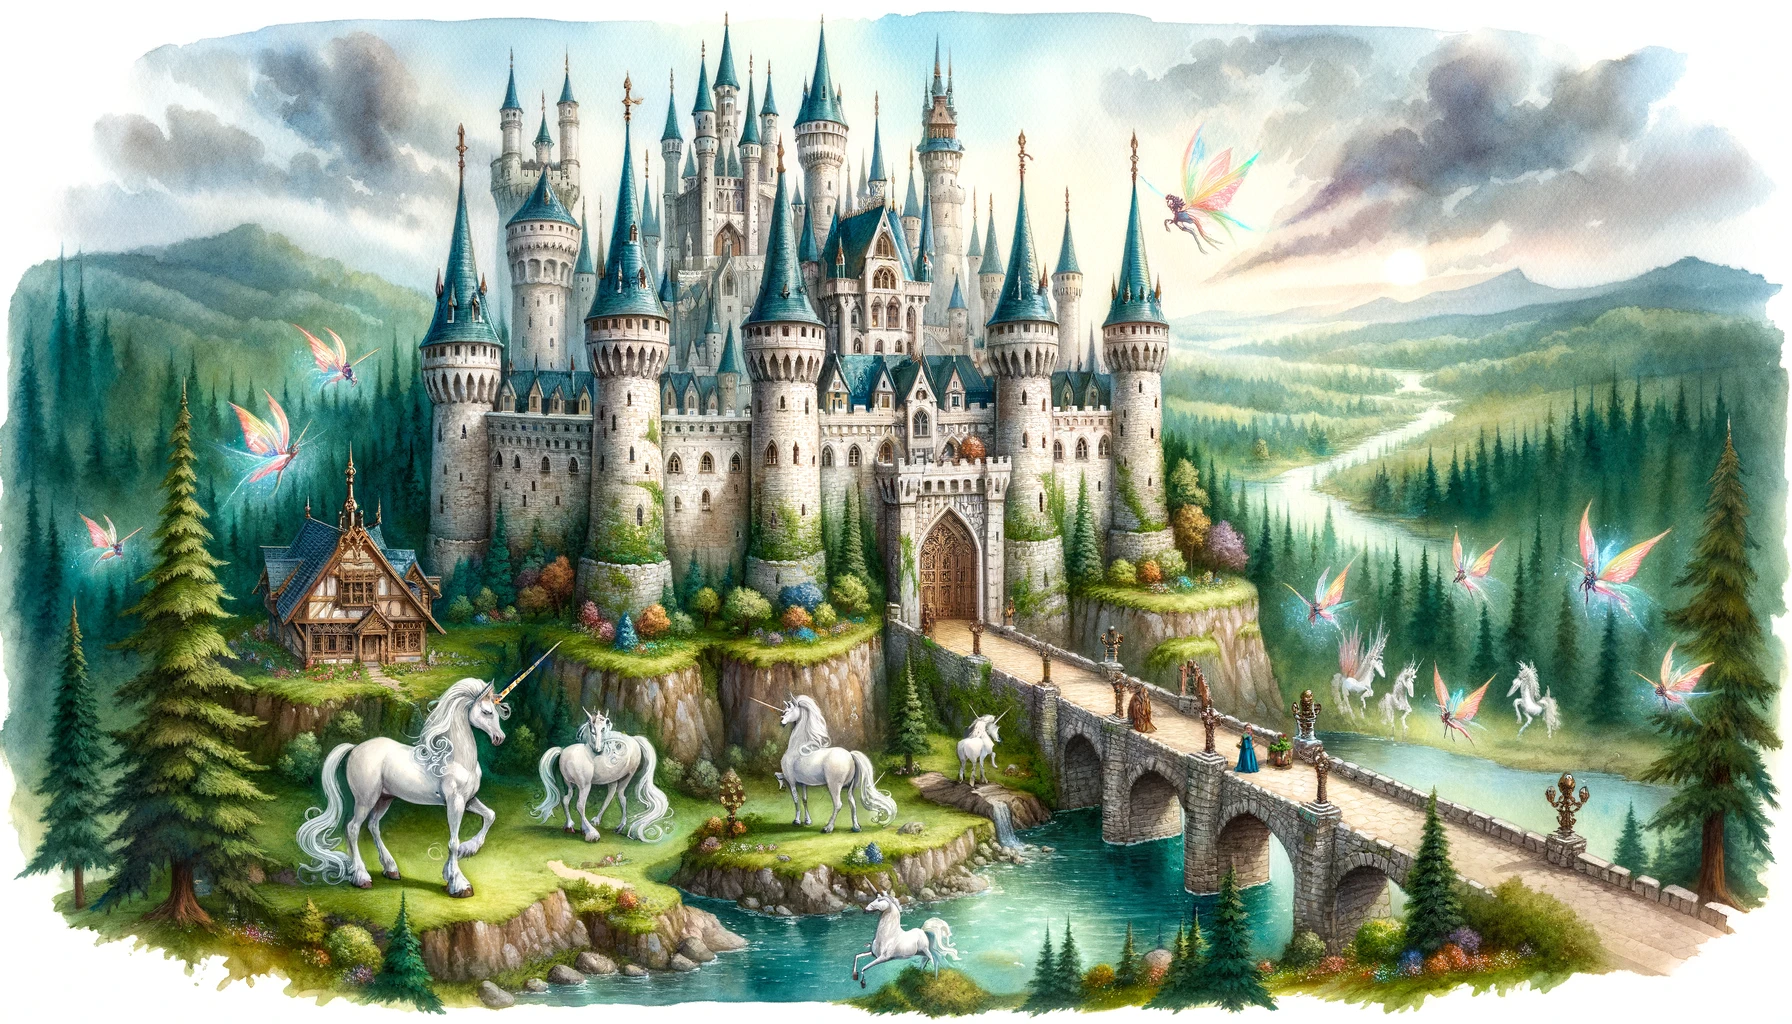 Watercolor painting of a medieval realm. A castle, grand and imposing, stands tall on a hill. Its spires and battlements tell tales of knights and battles. The landscape around is lush, with a forest that seems alive with magic. Unicorns, with their spiral horns, roam freely, and fairies, with their luminescent wings, dance in the air. A wide moat, perhaps home to more magical creatures, encircles the castle, and a stone bridge, guarded by statues, leads to the main gates.